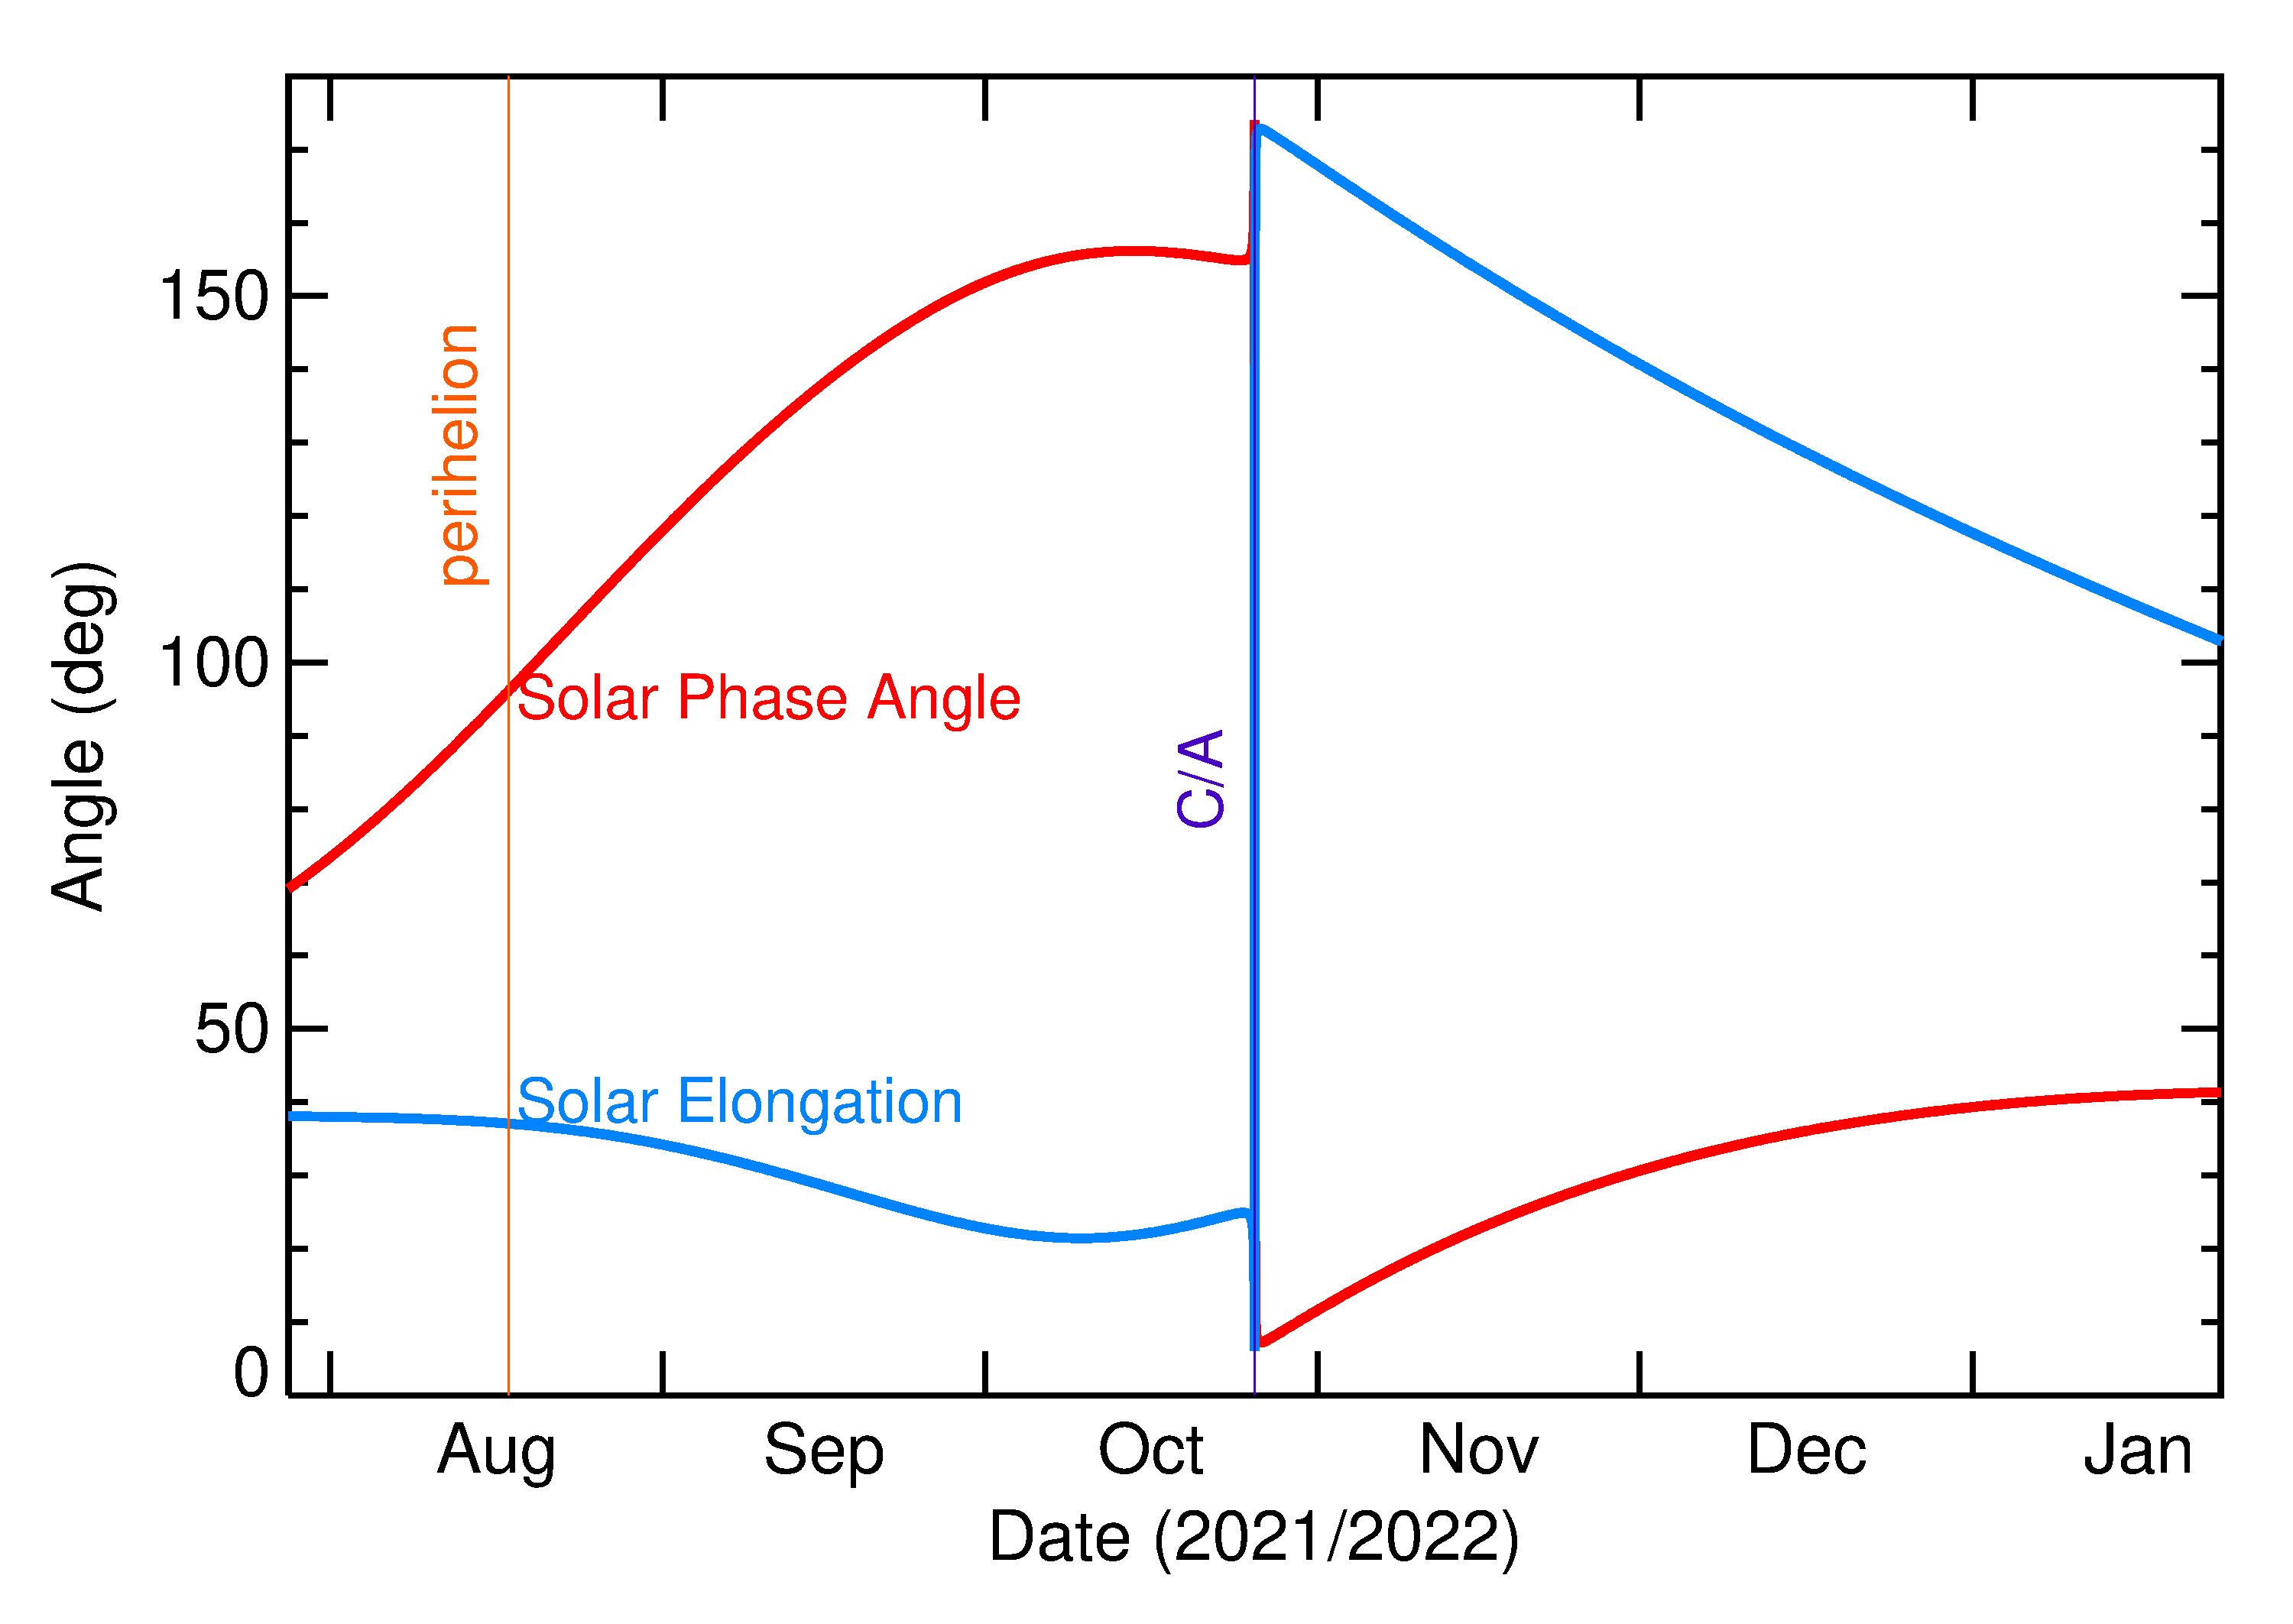 Solar Elongation and Solar Phase Angle of 2021 UA1 in the months around closest approach